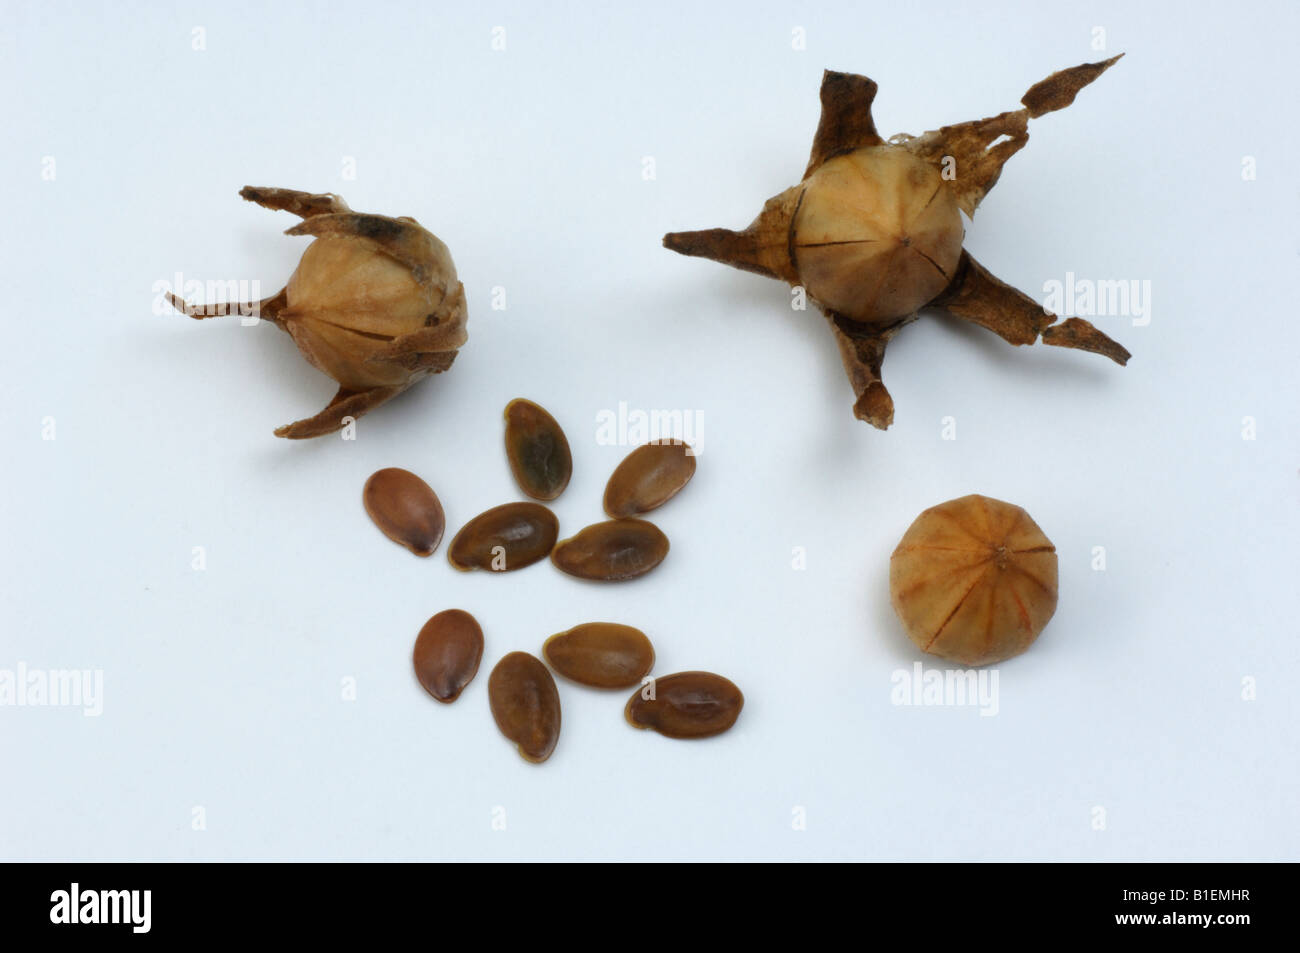 Large-flowered Flax (Linum grandiflorum), fruit capsules and seeds, studio picture Stock Photo